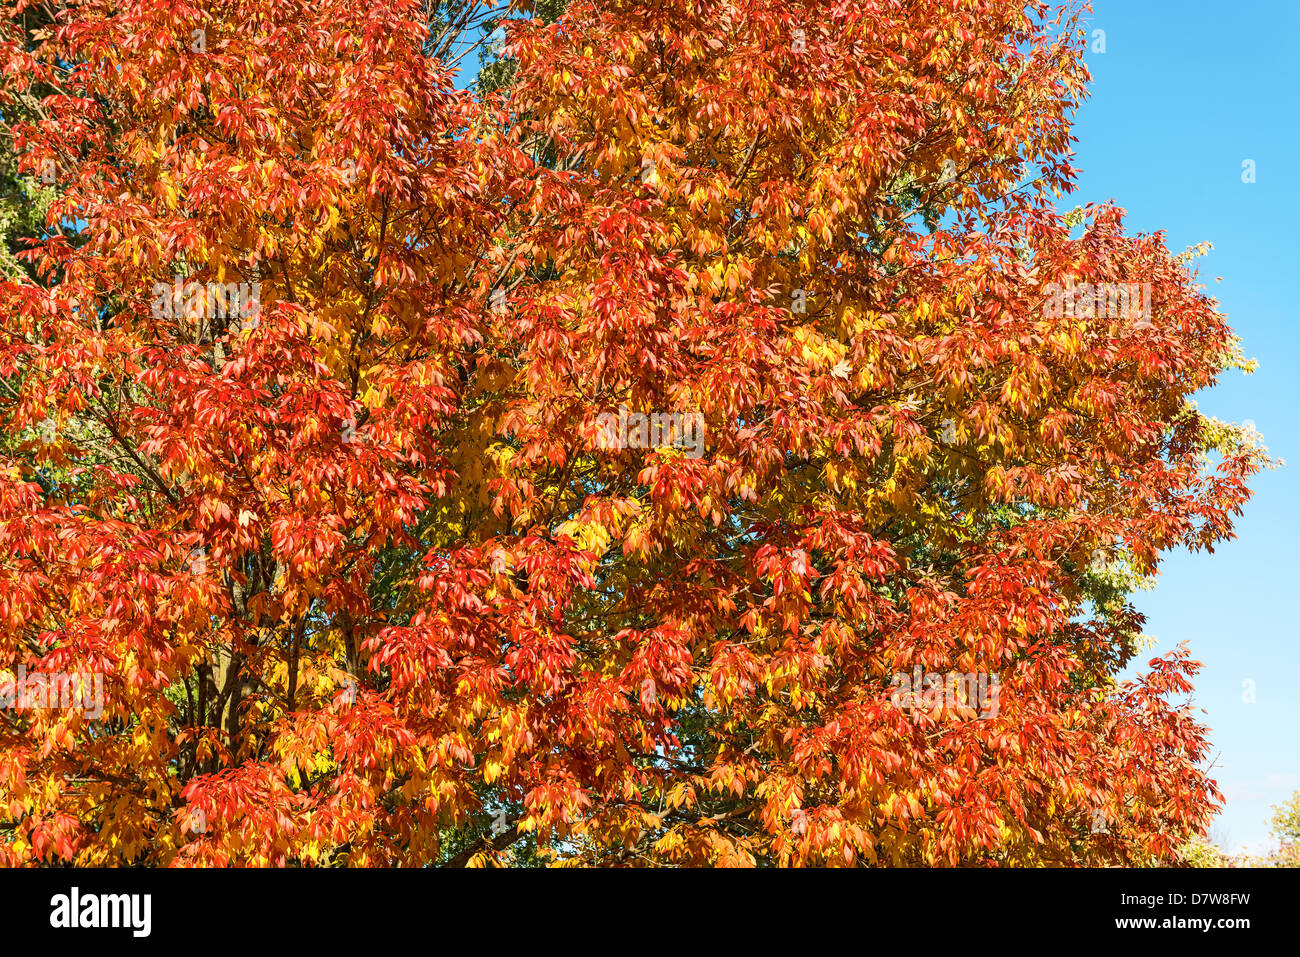 Vibrant color of Leaves on tree in the fall Stock Photo